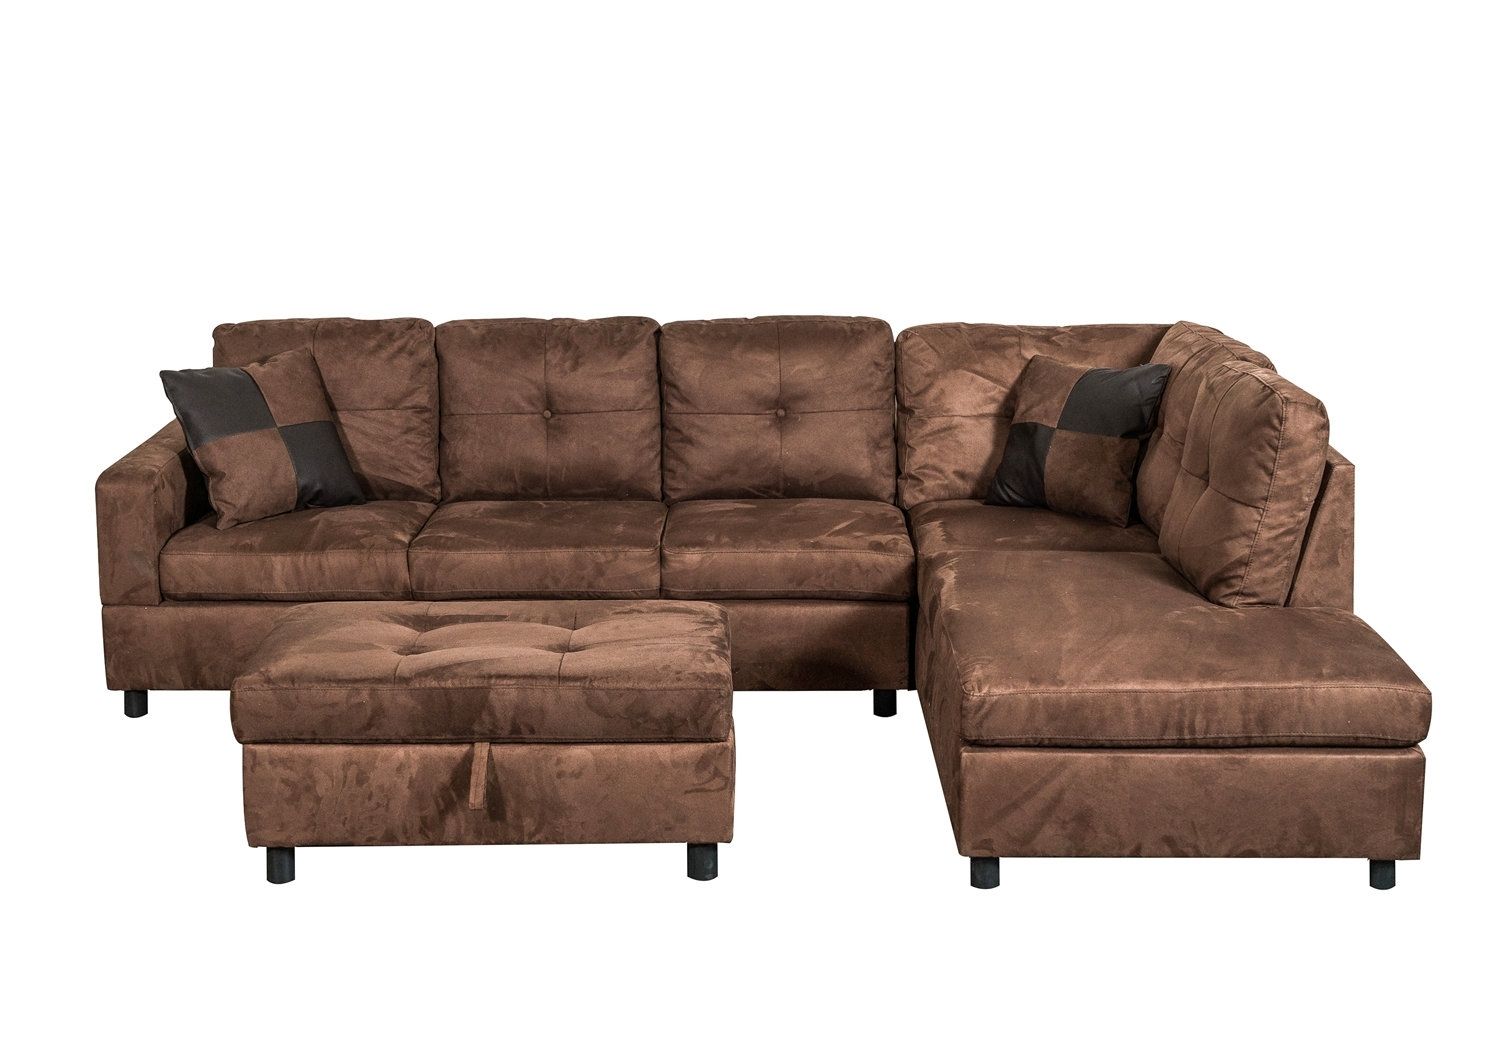 Charlton Home Richview Reversible Sectional Sofa With Ottoman | Wayfair In Collins Sofa Sectionals With Reversible Chaise (View 2 of 25)